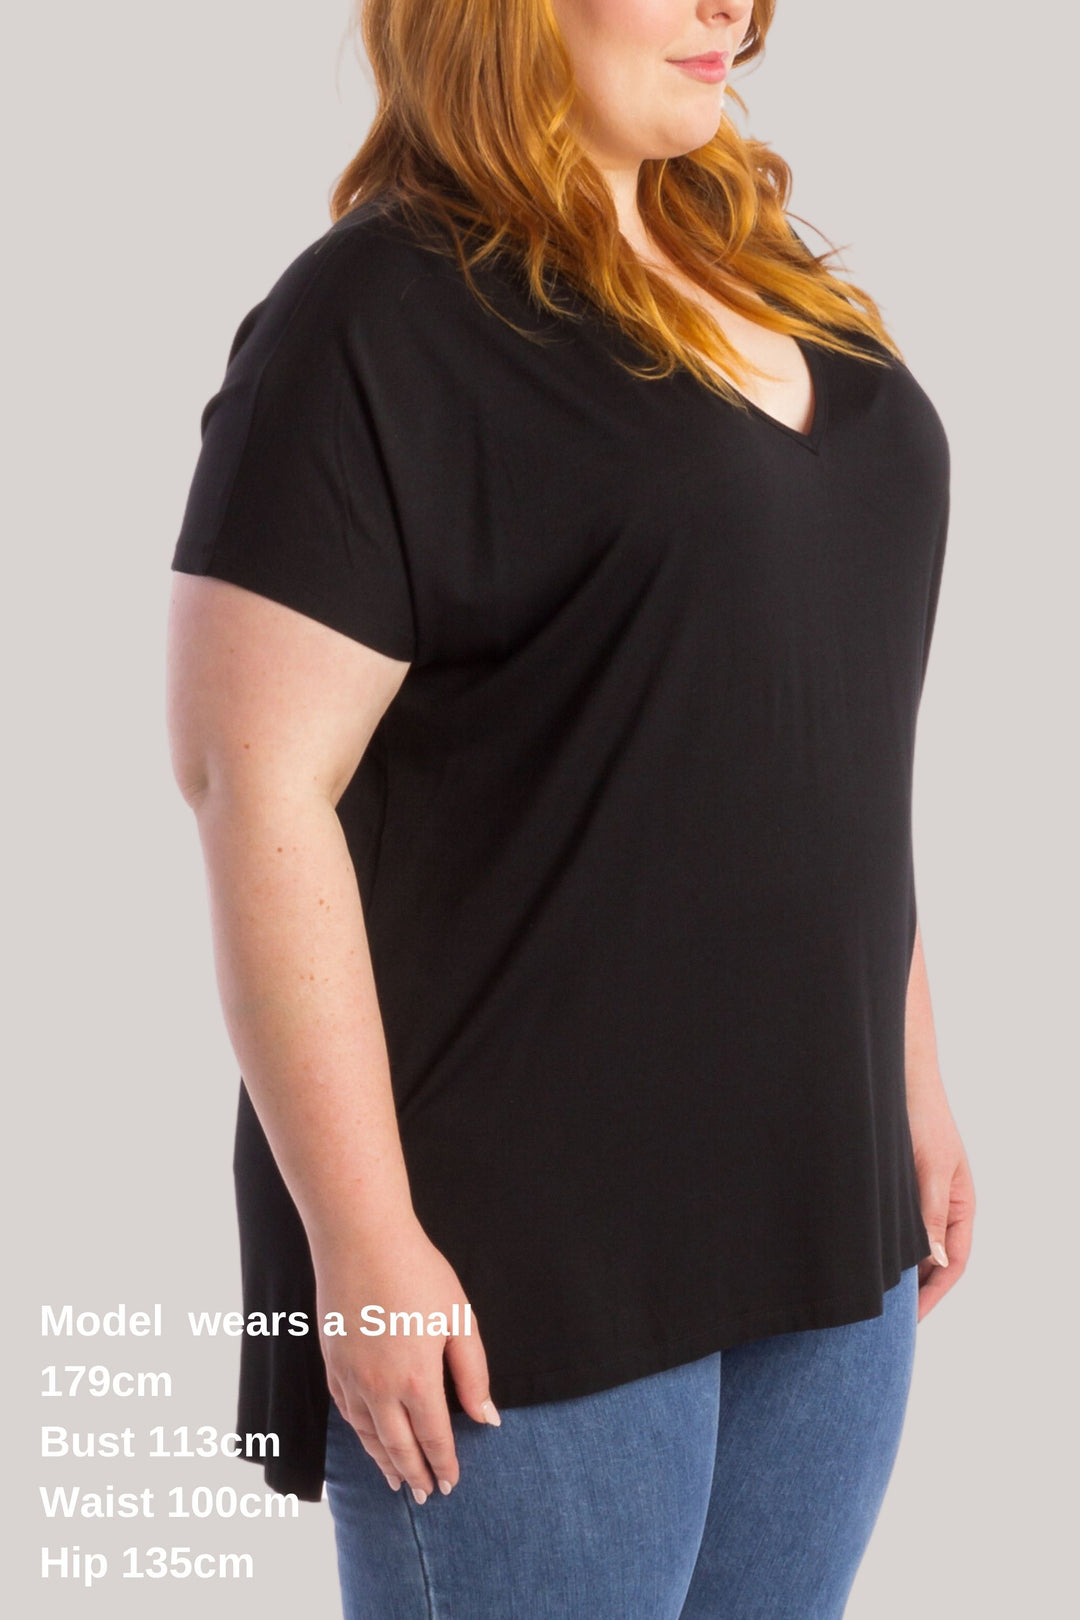 Right By Your Side Oversized Tee - Black